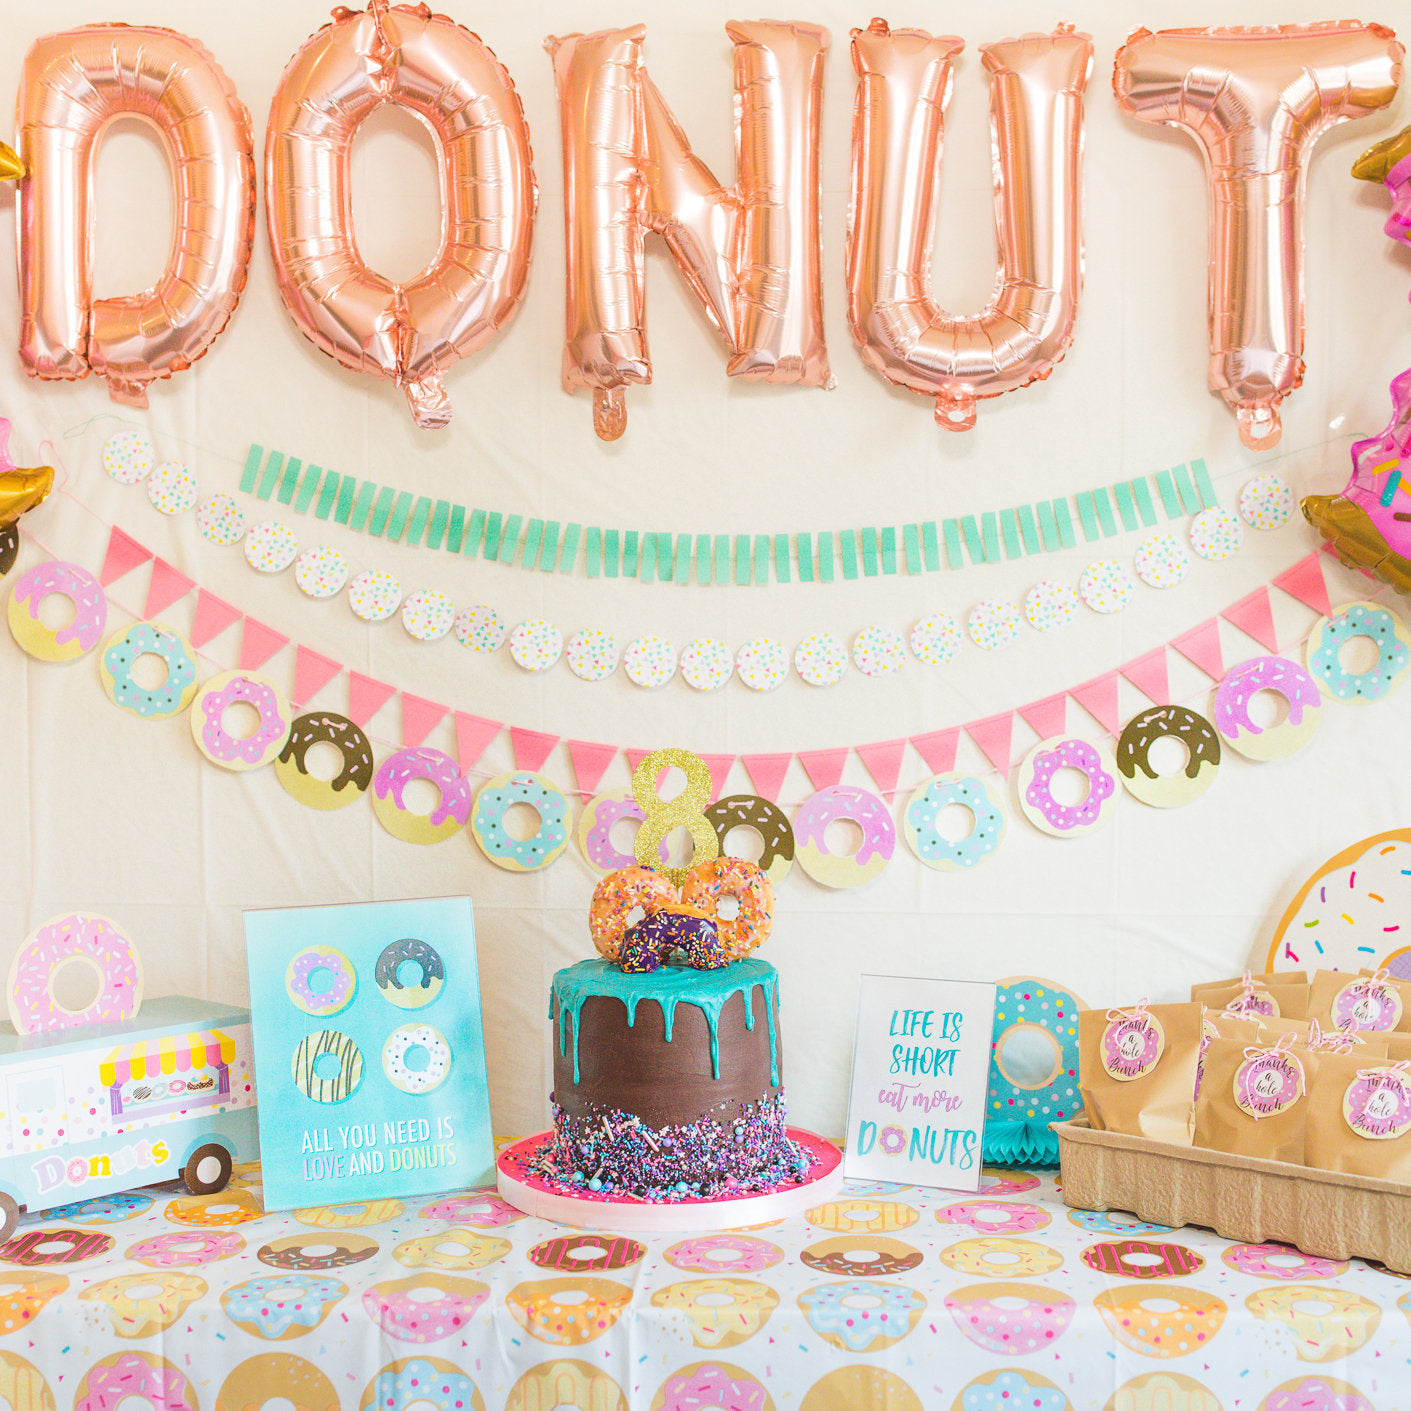 donut themed party